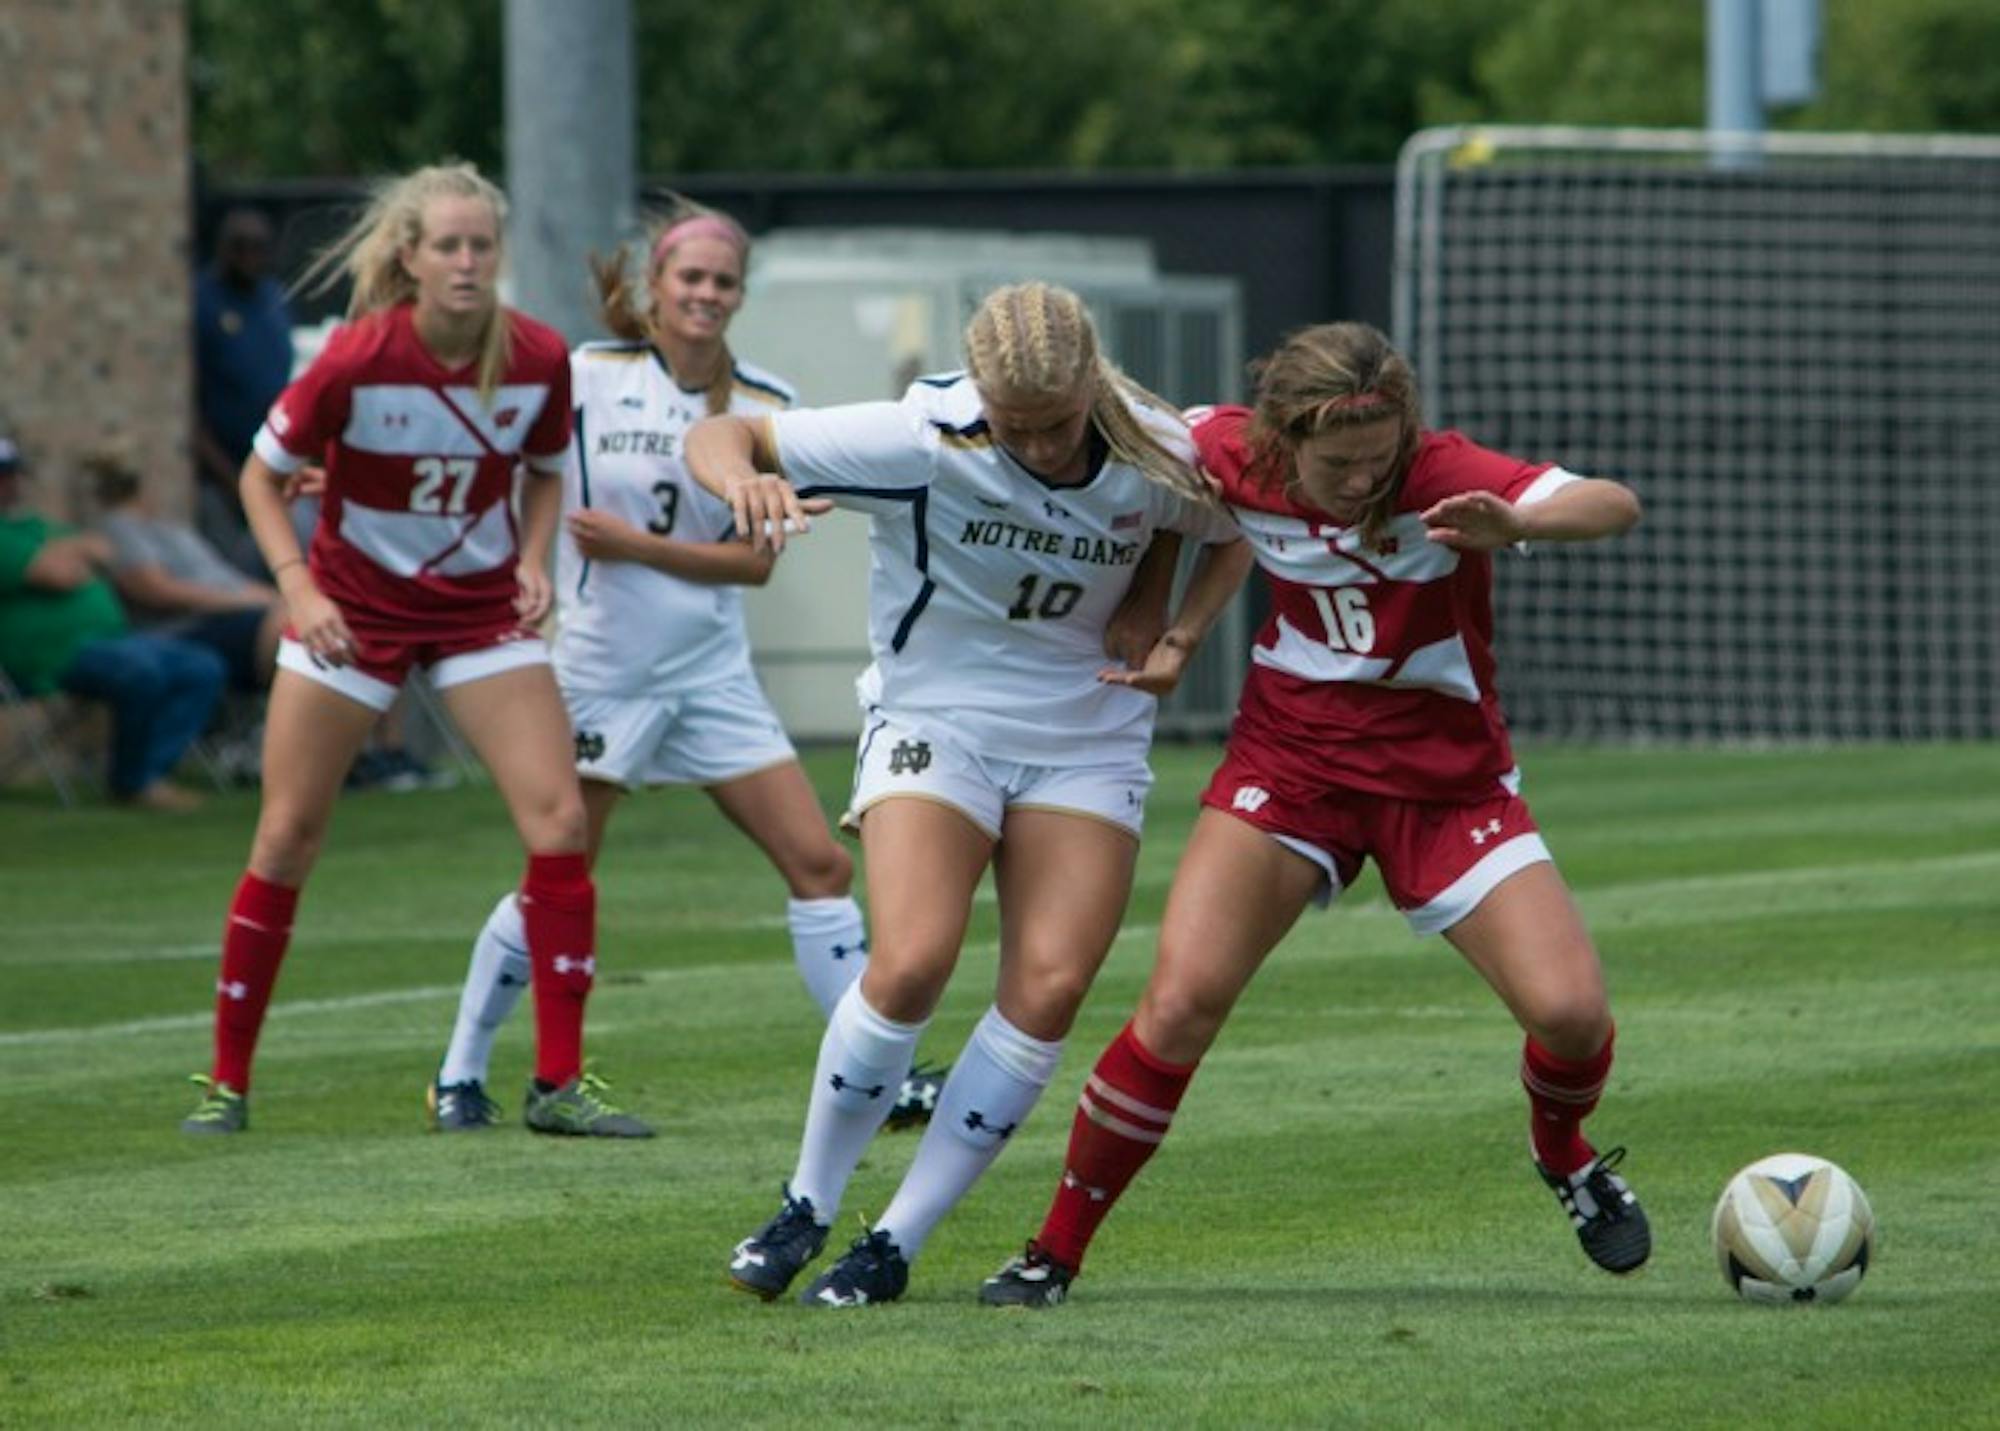 Irish freshman forward Jennifer Westendorf fights for possession of the ball during Notre Dame's 1-0 win over Wisconsin on Aug. 21 at Alumni Stadium.